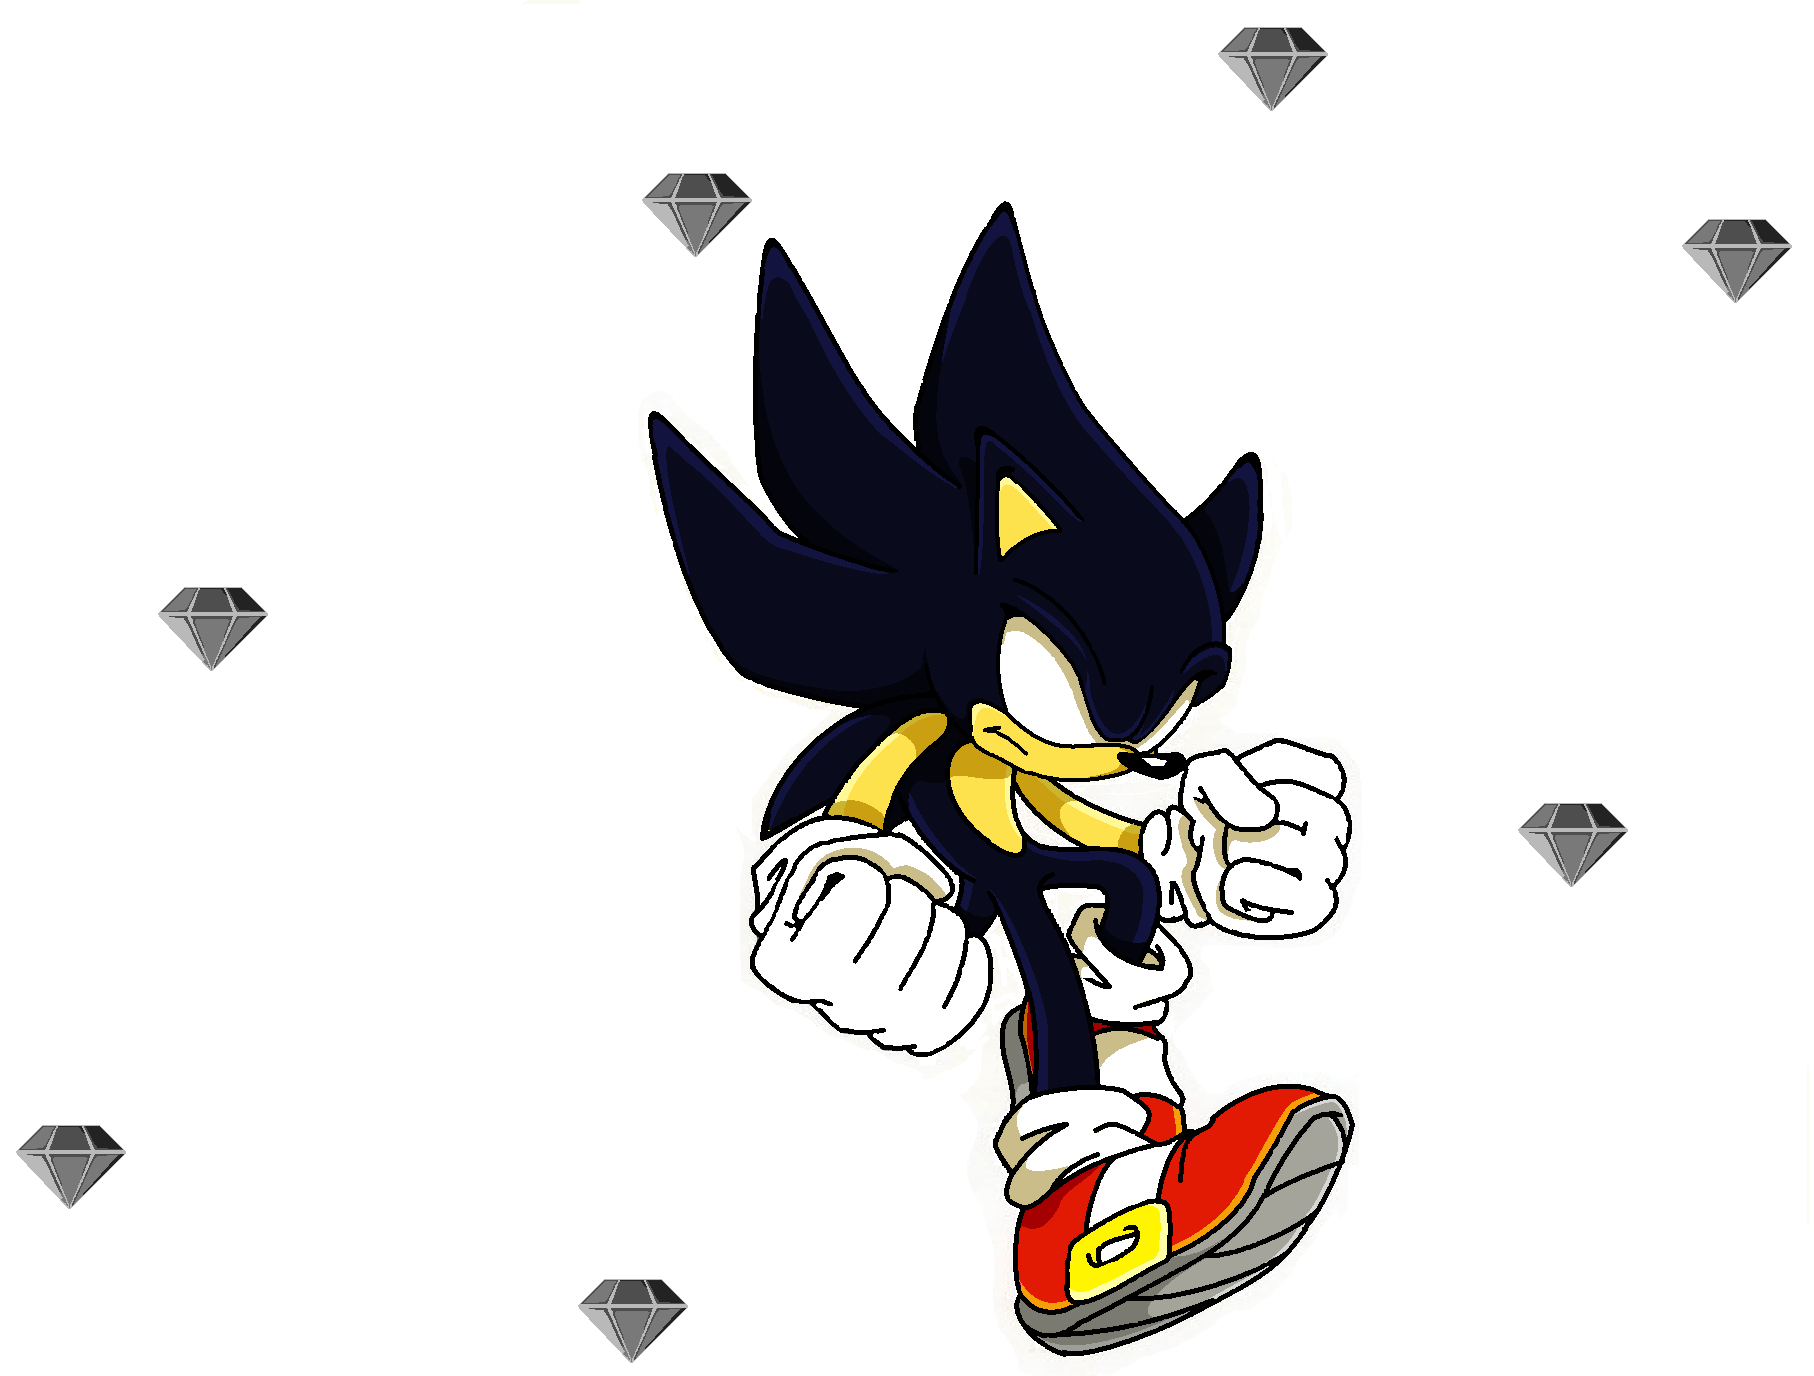 Dark_Super_Sonic_by_Happy_Food.png